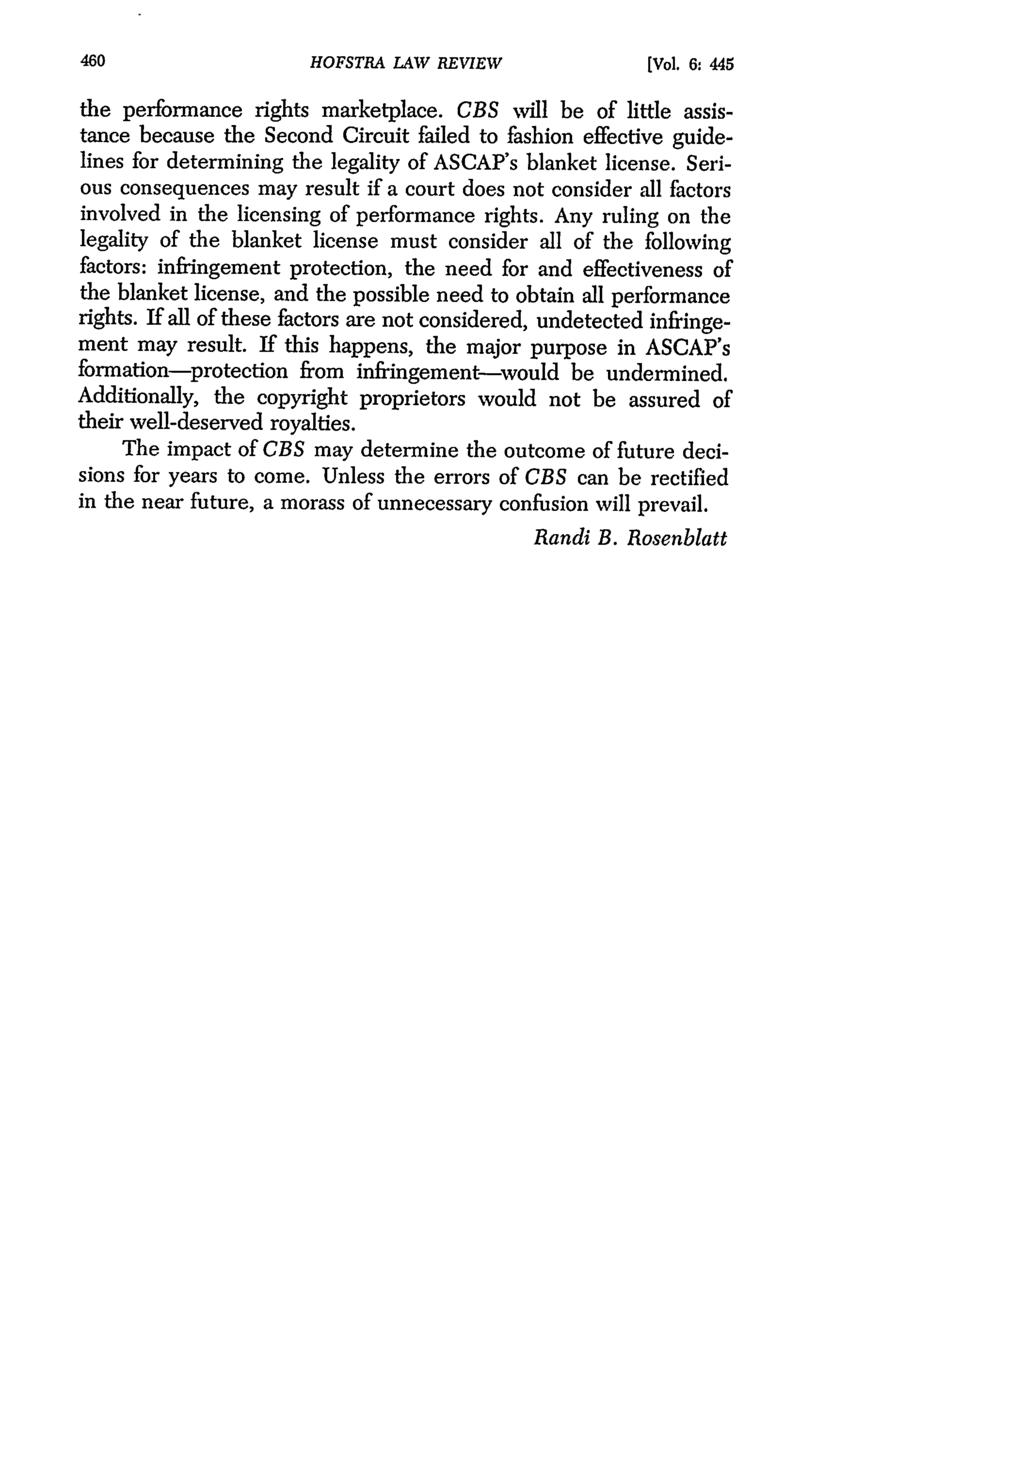 Hofstra Law Review, Vol. 6, Iss. 2 [1978], Art. 7 HOFSTRA LAW REVIEW [Vol. 6: 445 the performance rights marketplace.